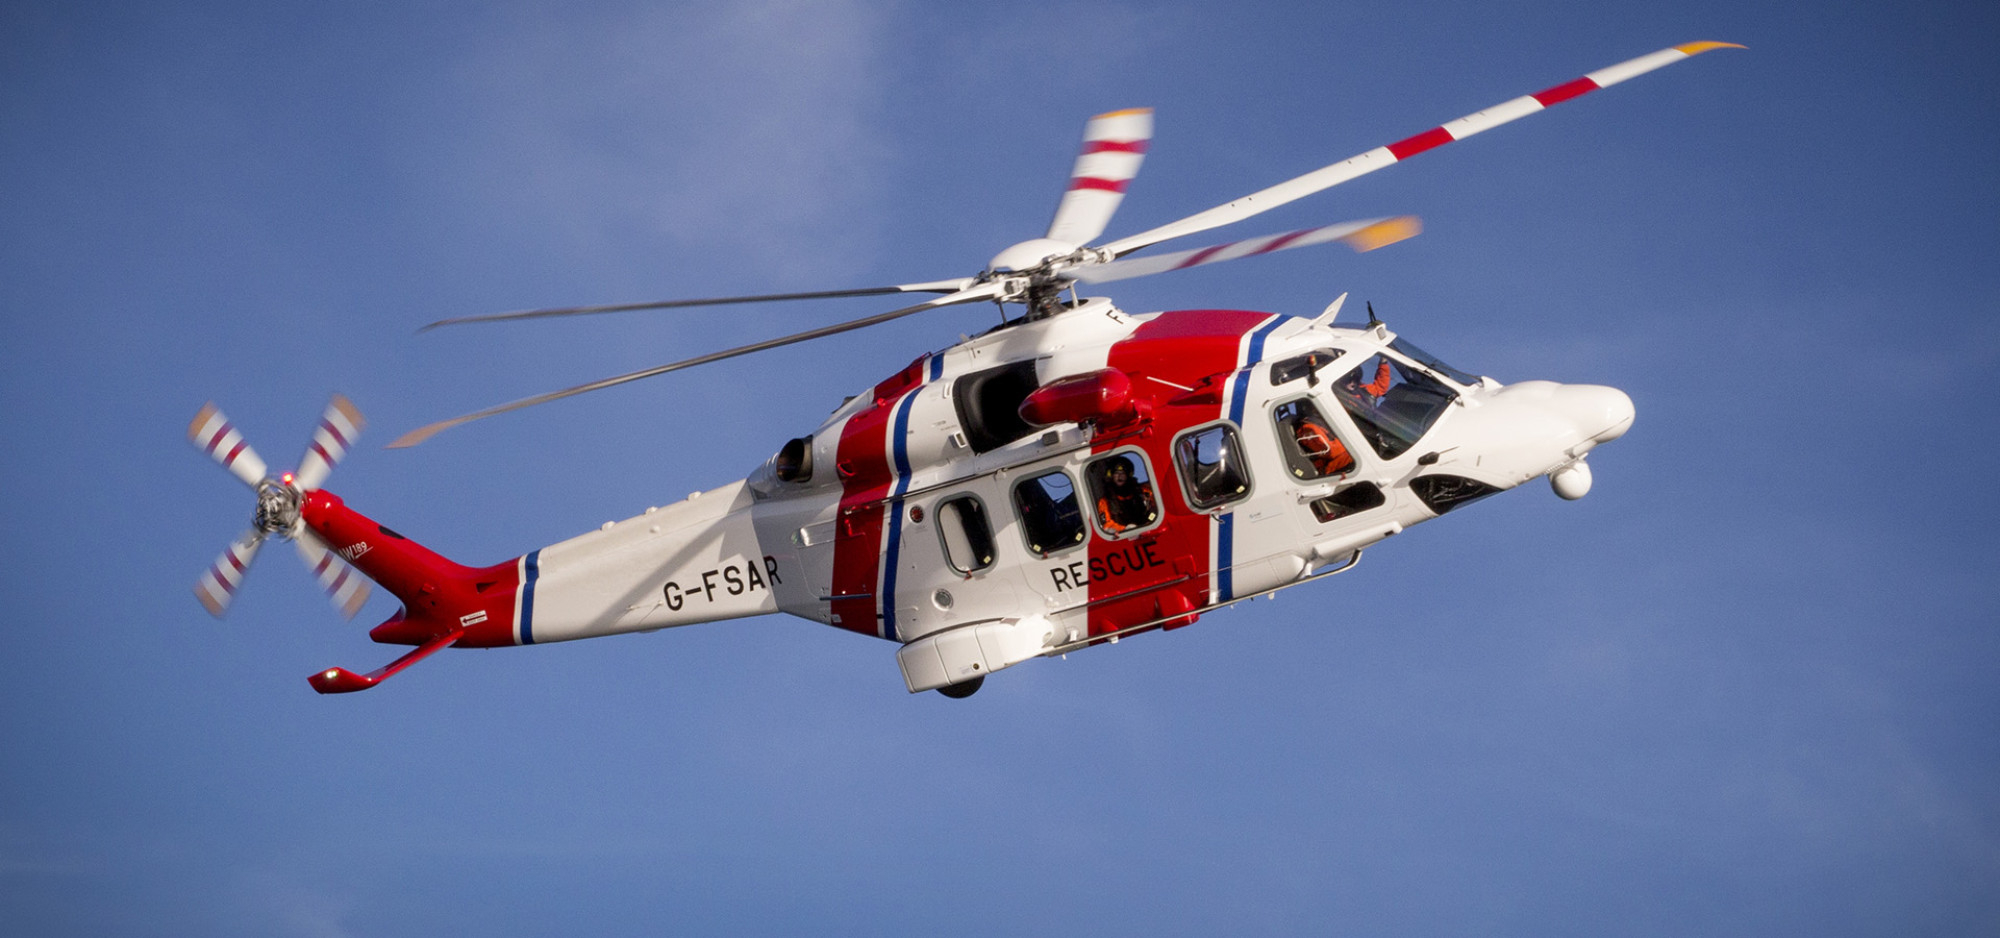 Bristow completes acquisition of British International